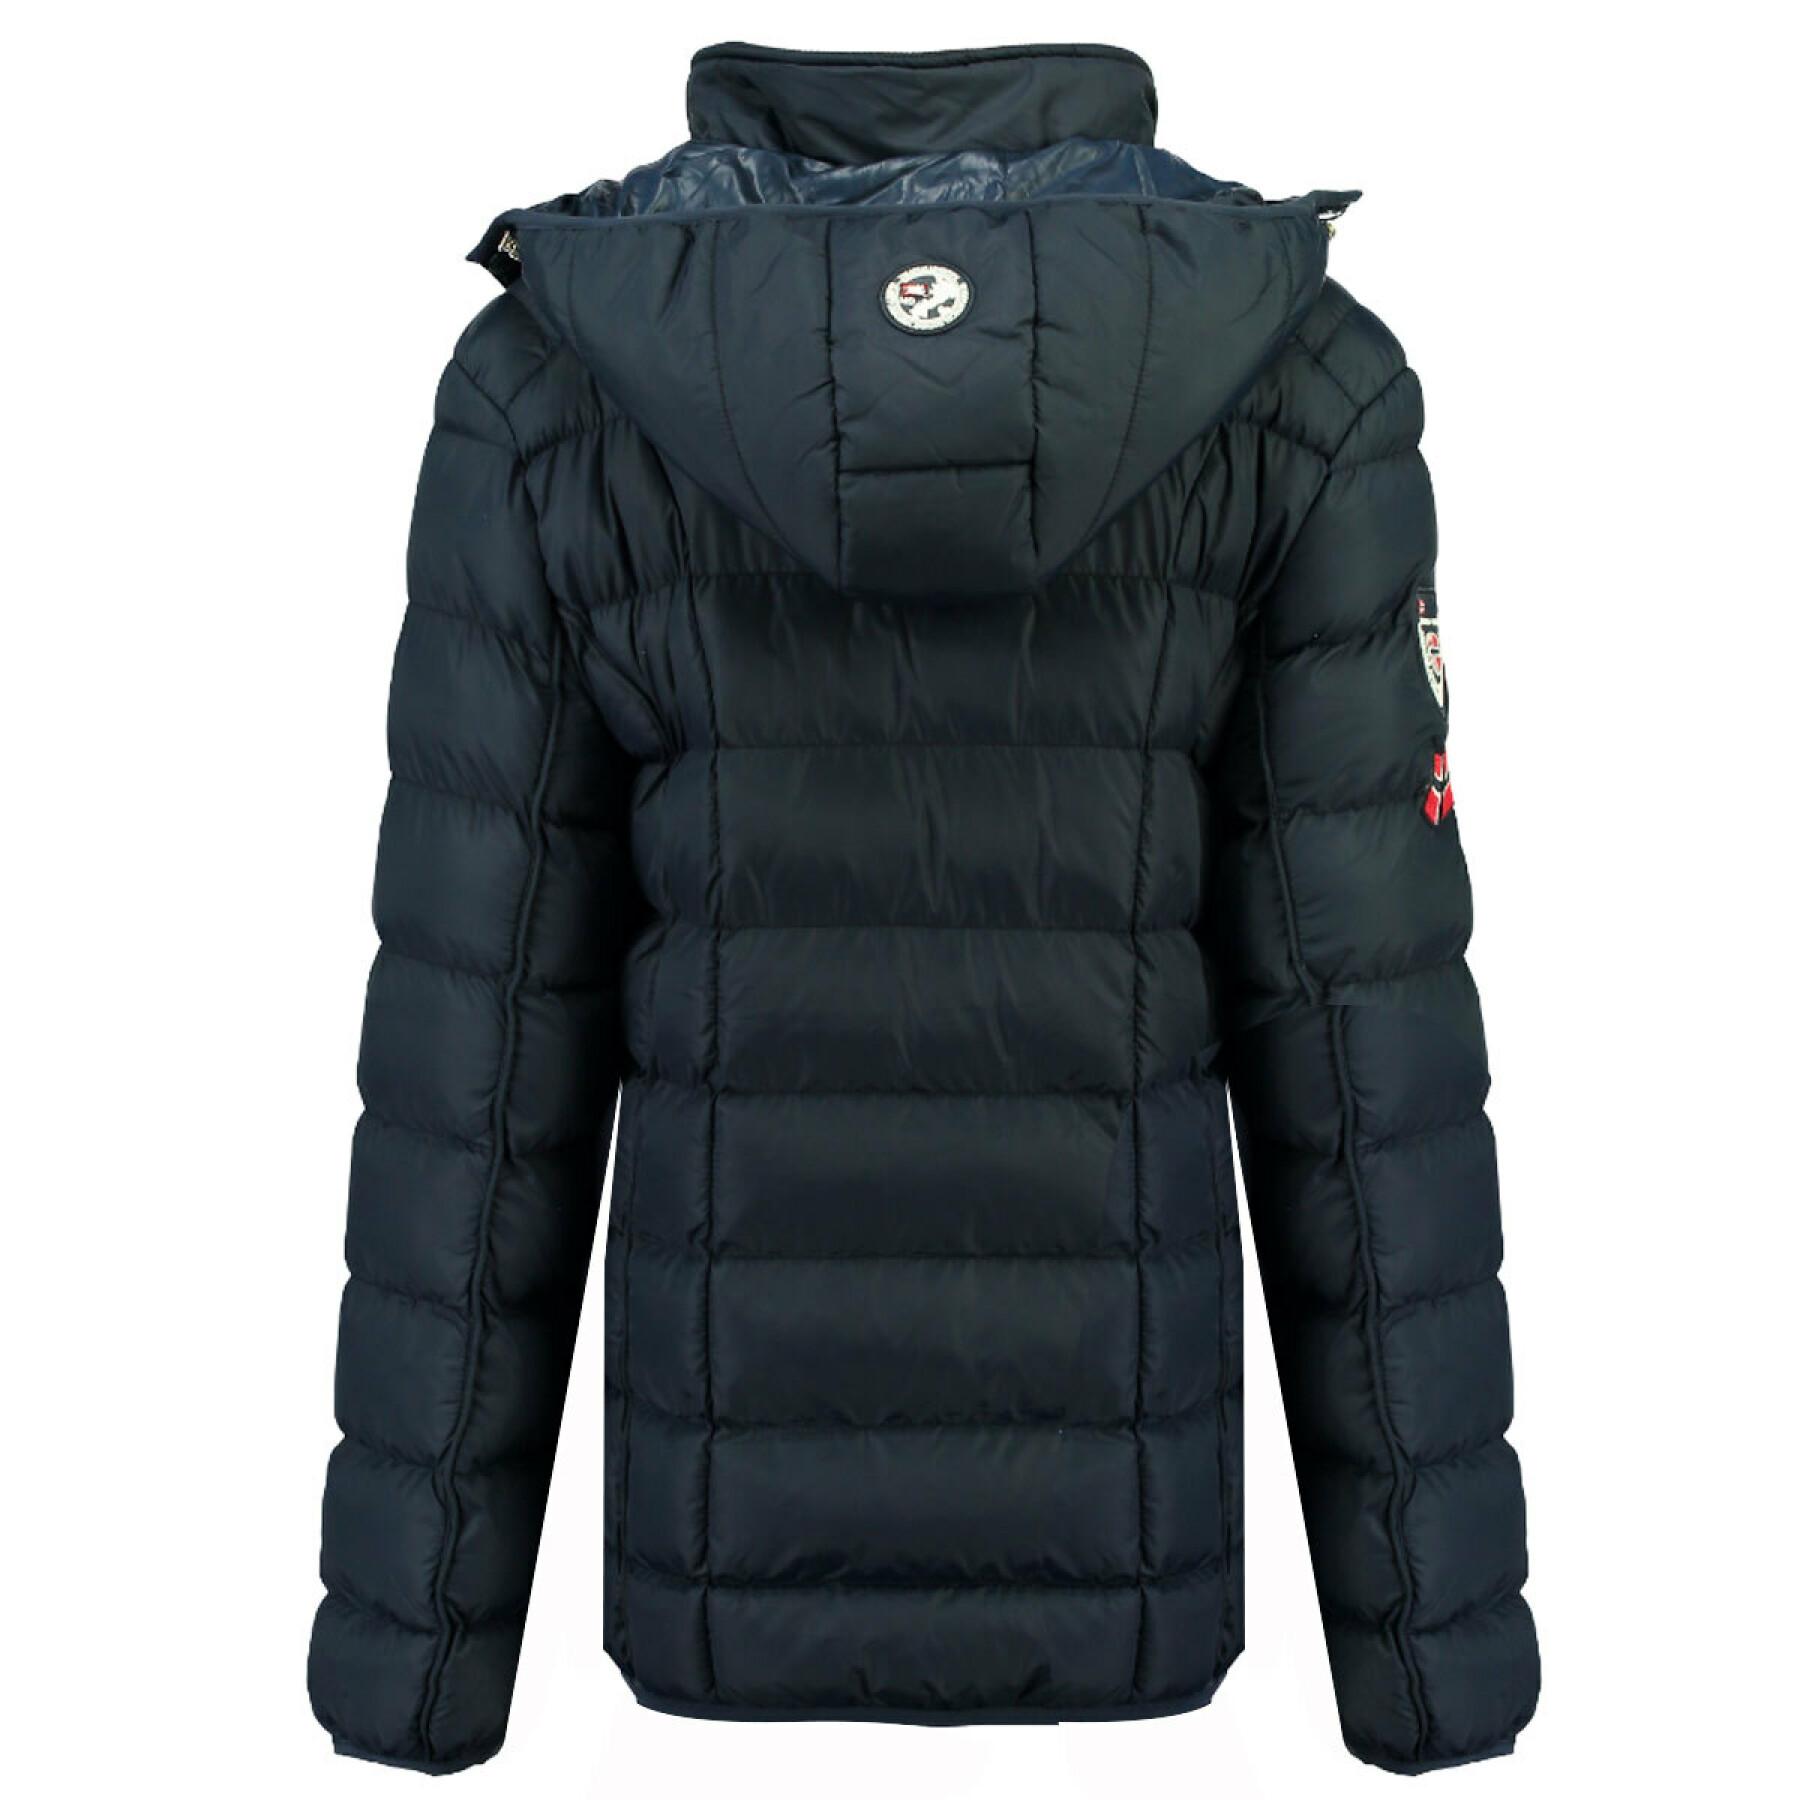 Chaqueta de plumón para mujer Geographical Norway Babette Stv